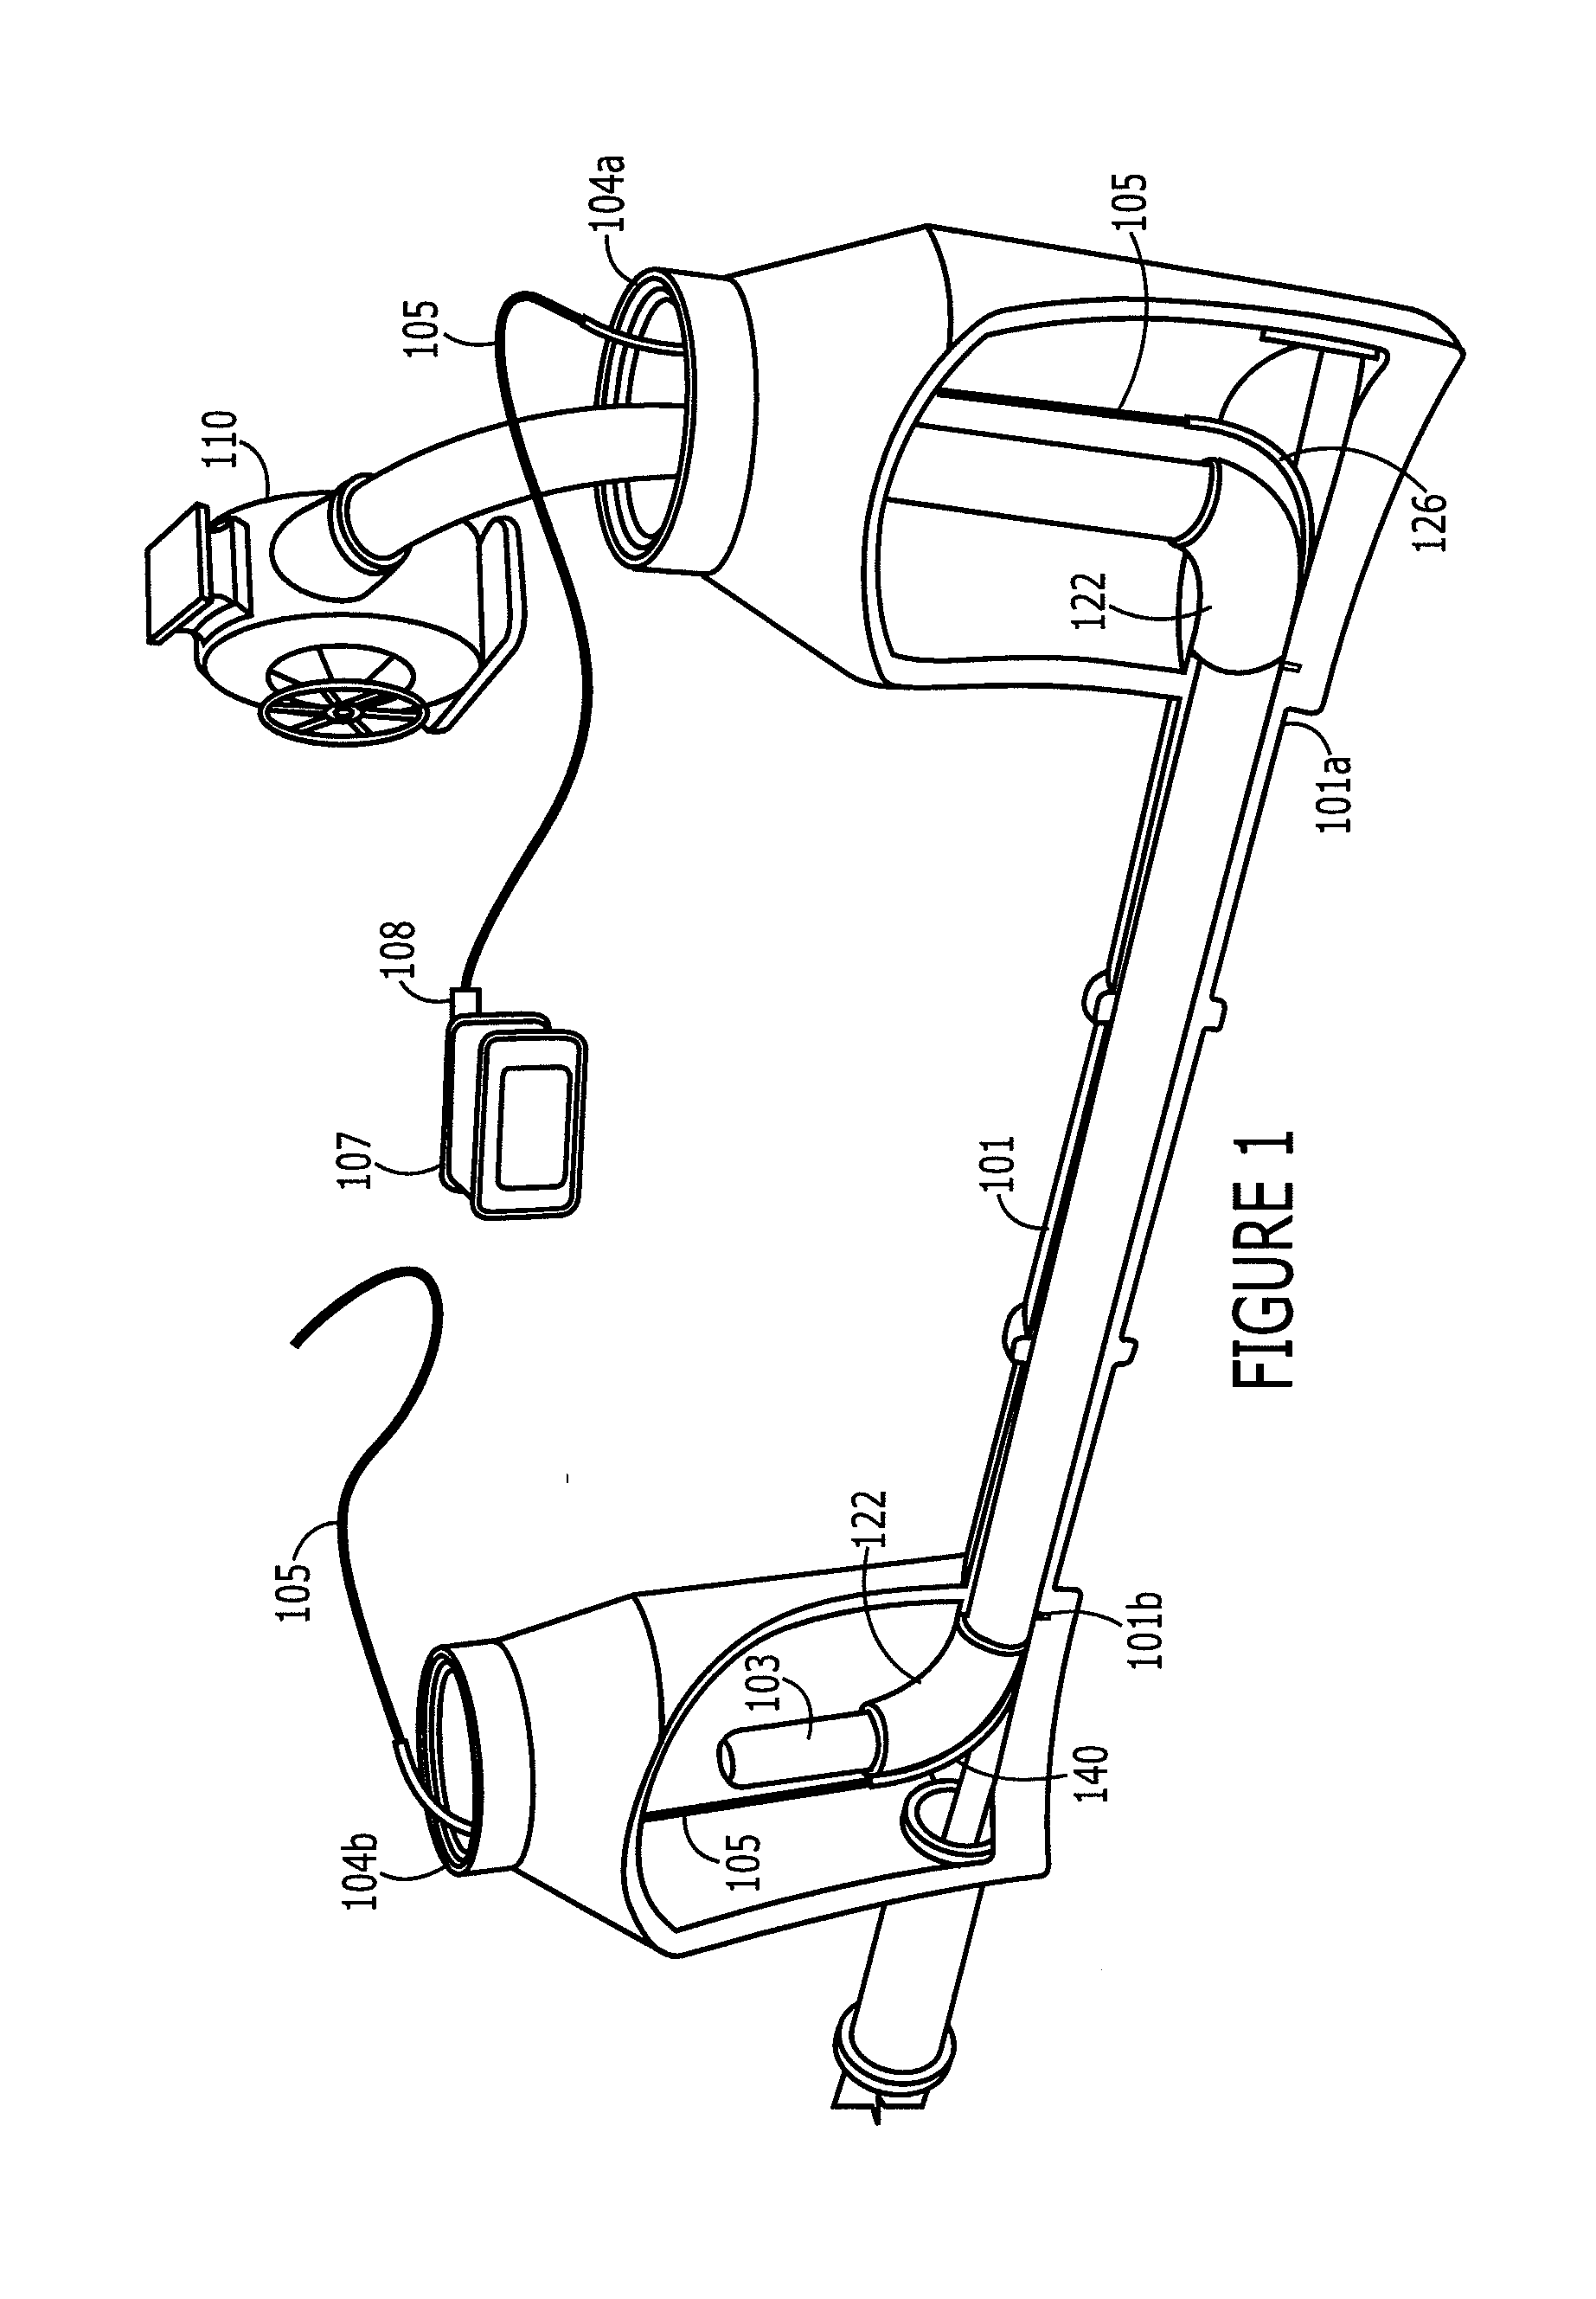 Method and apparatus for determining proper curing of pipe liners using distributed temperature sensing